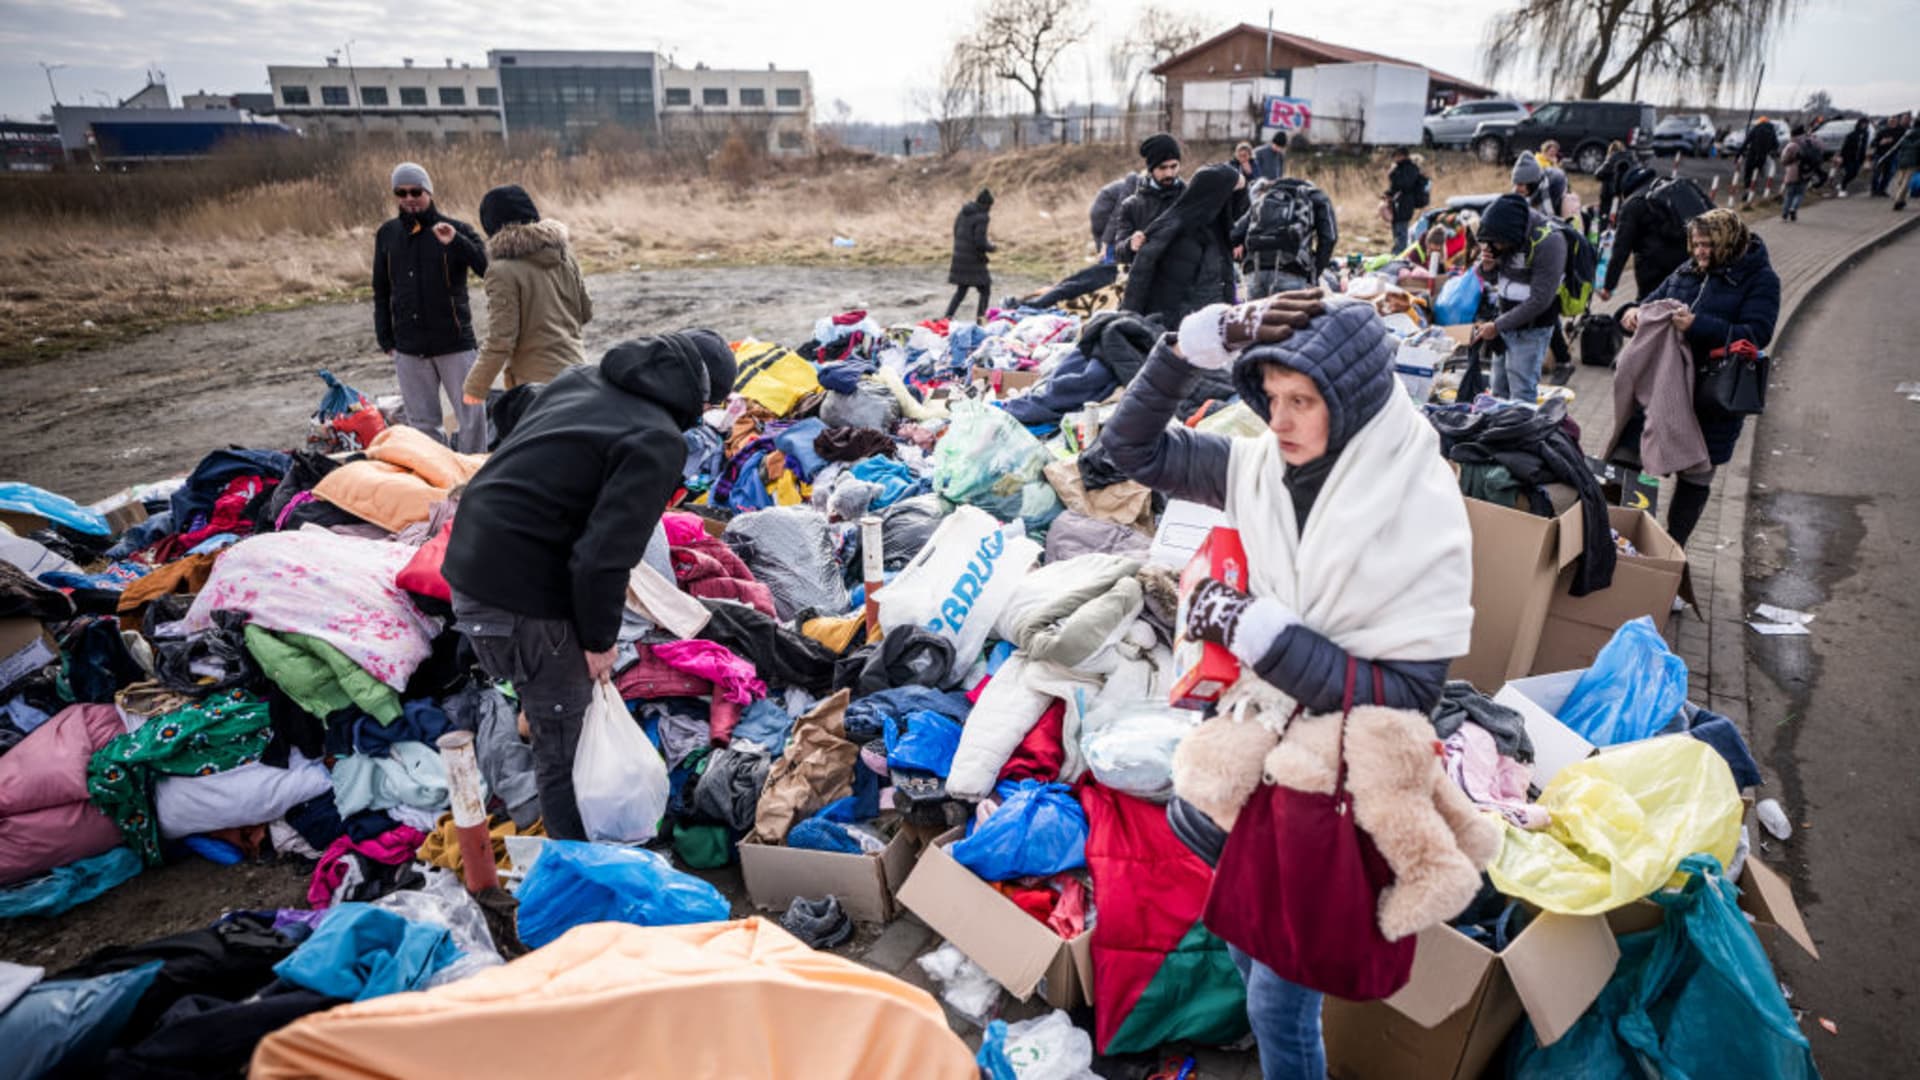 After crossing the border from Shehyni in Ukraine to Medyka in Poland, refugees seek clothing and blankets provided by Polish volunteers from police officers.